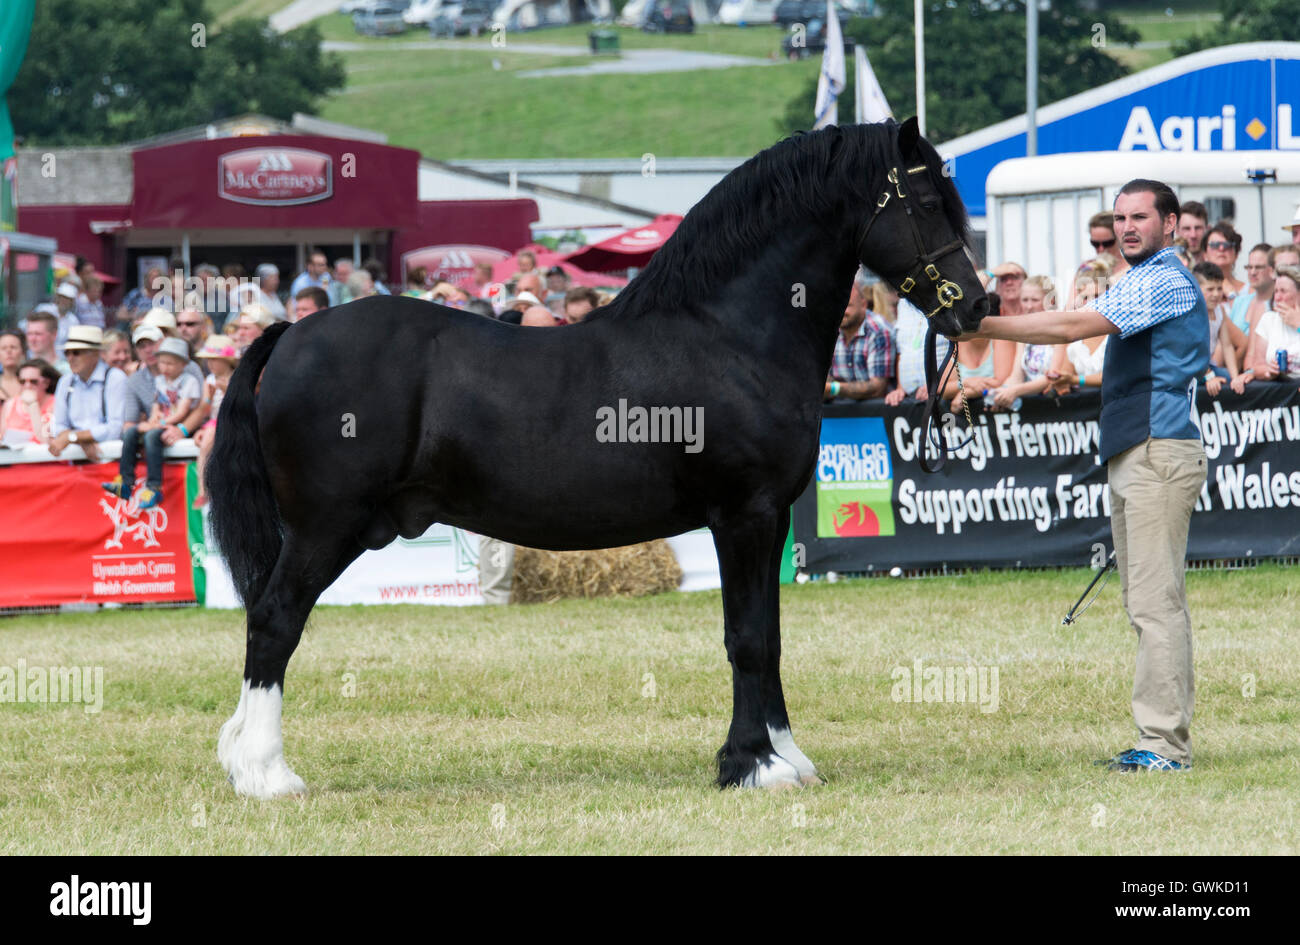 Welsh Cob Stallions being shown in the main ring at the Royal Welsh Show 2016, Wales, UK. Stock Photo